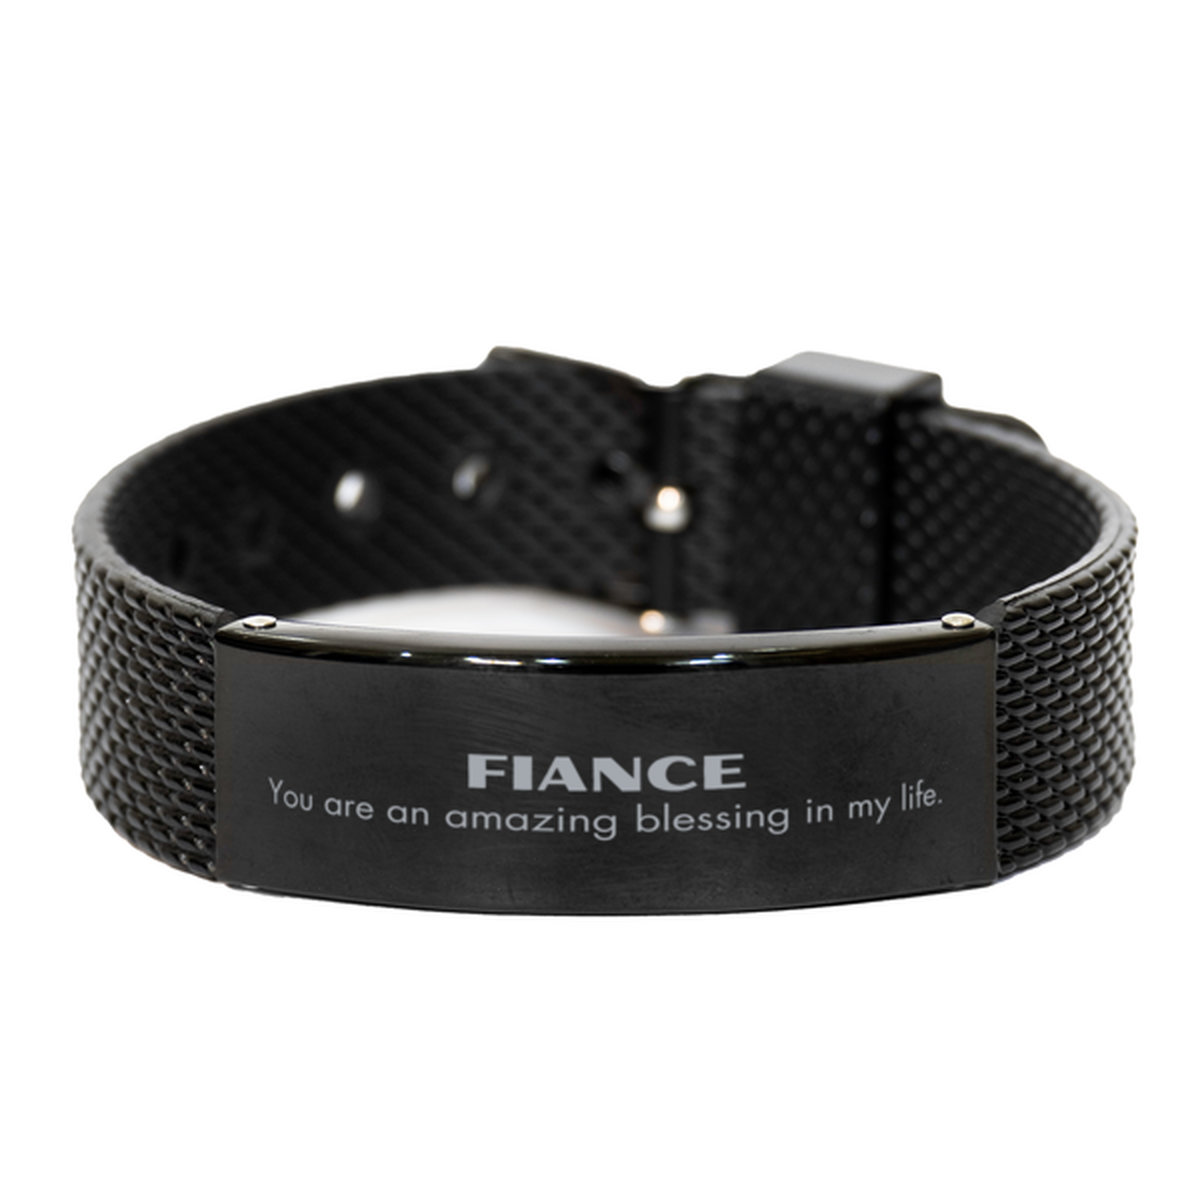 Fiance Black Shark Mesh Bracelet, You are an amazing blessing in my life, Thank You Gifts For Fiance, Inspirational Birthday Christmas Unique Gifts For Fiance